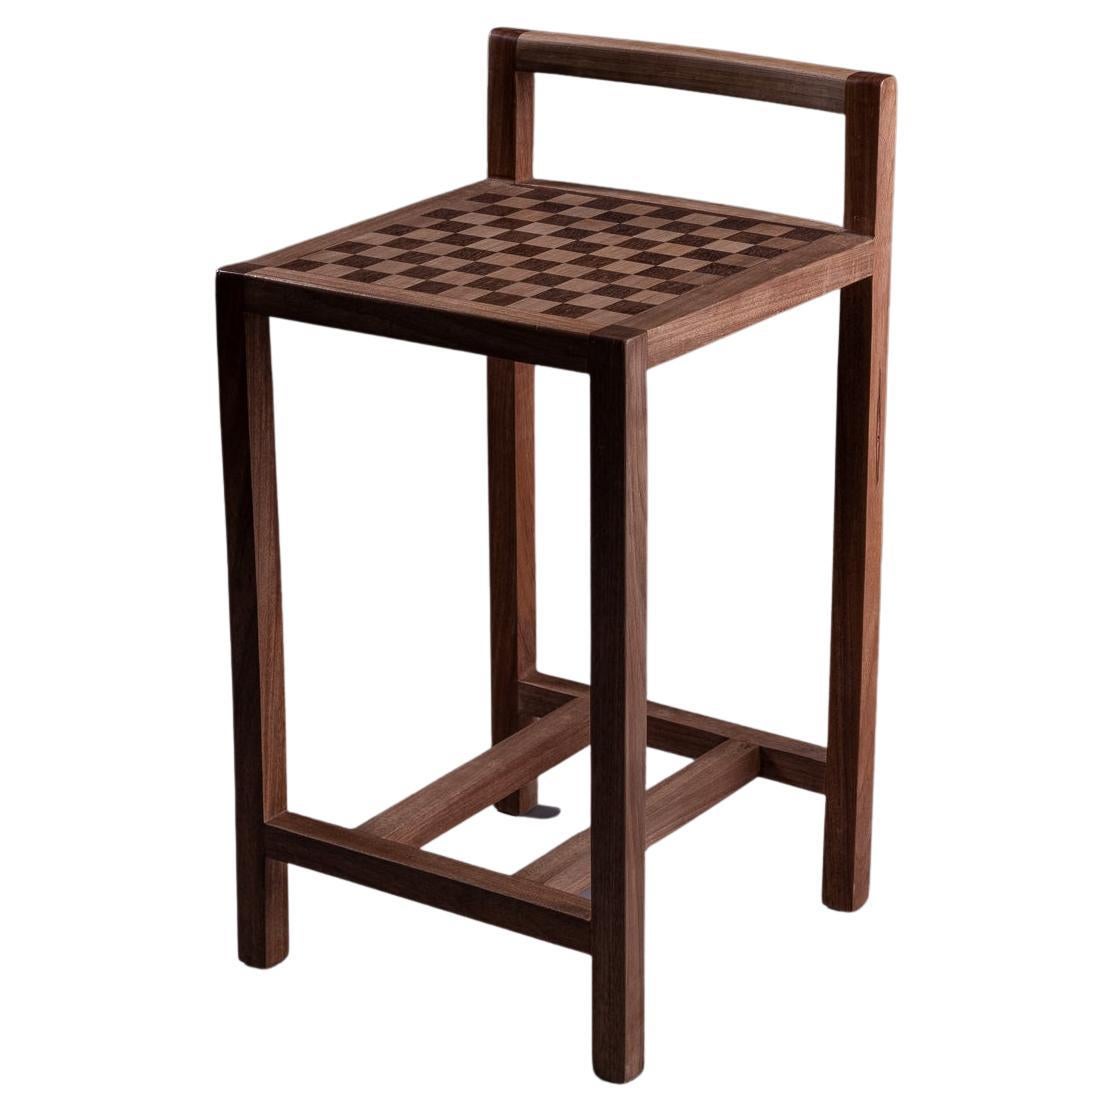 The Jojo stool. Brazilian Solid Wood and Marquetry Design by Amilcar Oliveira